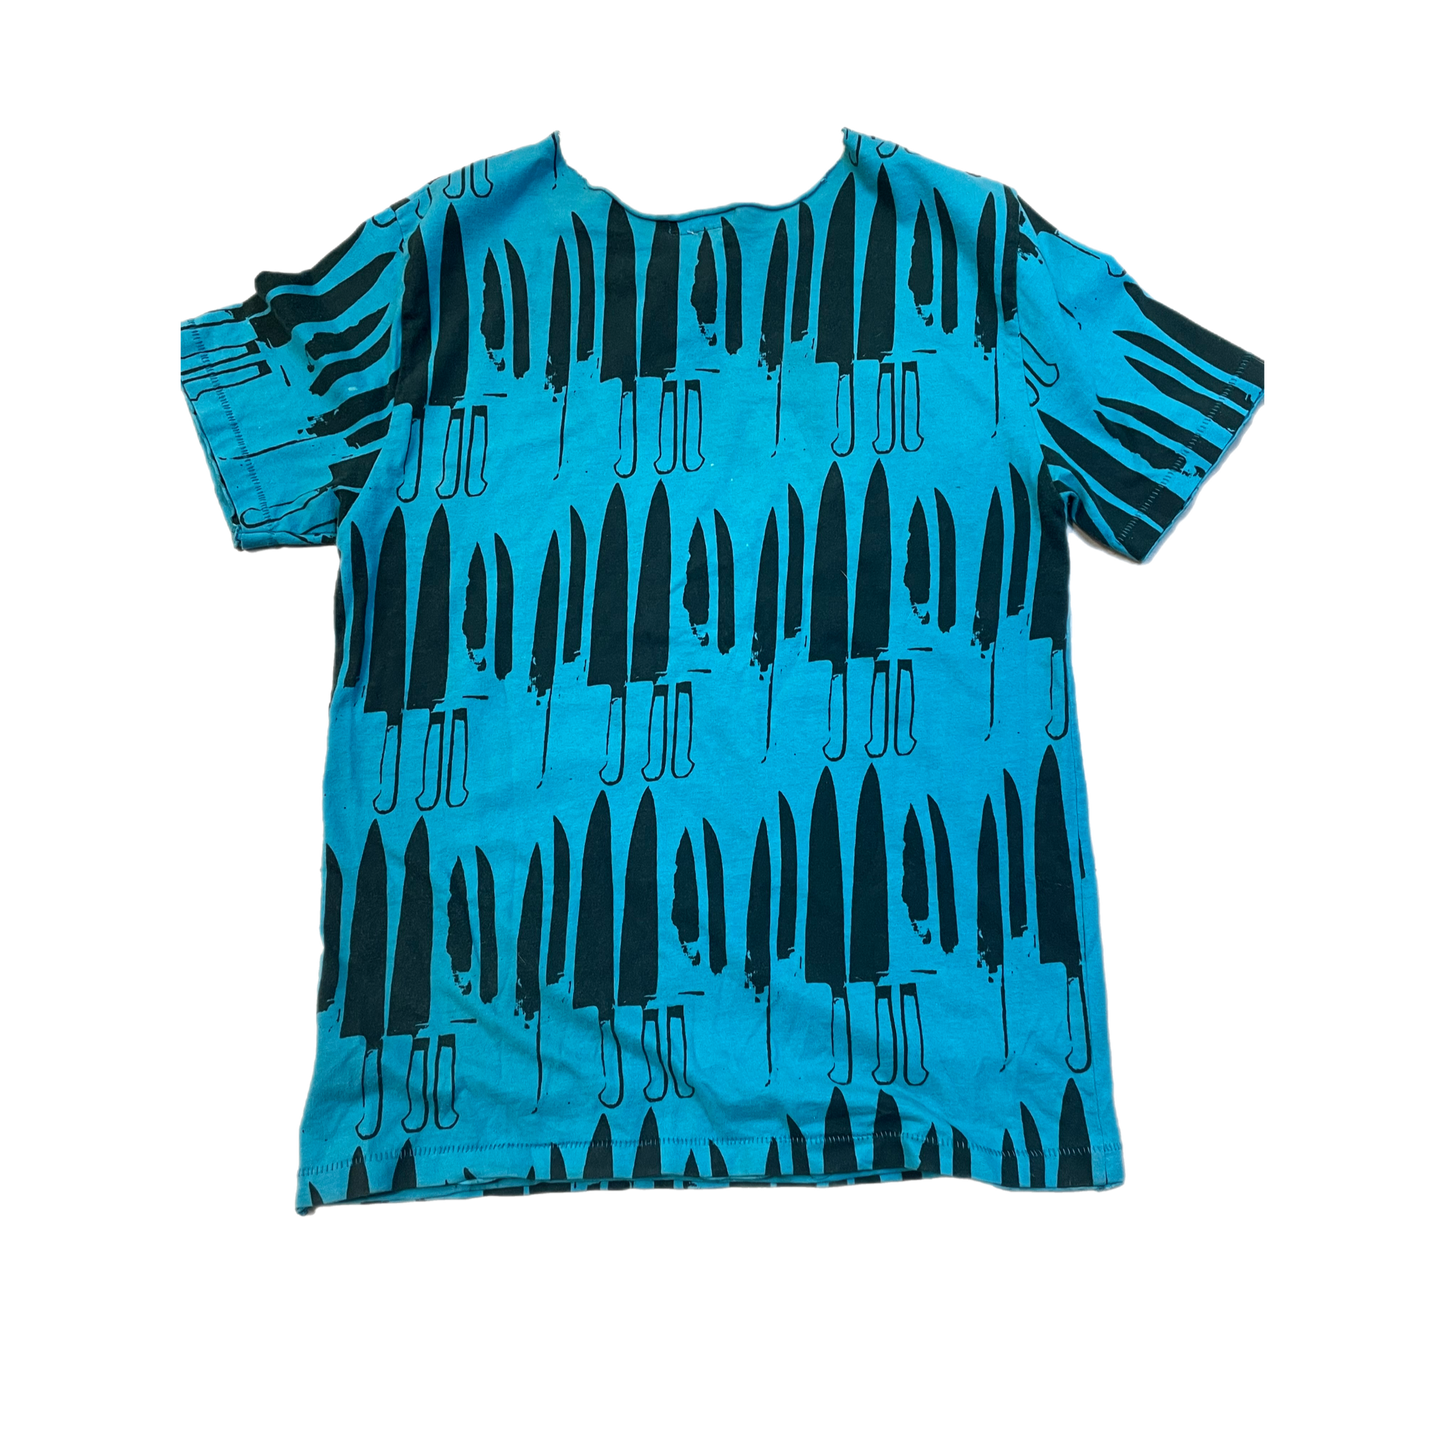 Andy Warhol Teal Knife Tee Size M